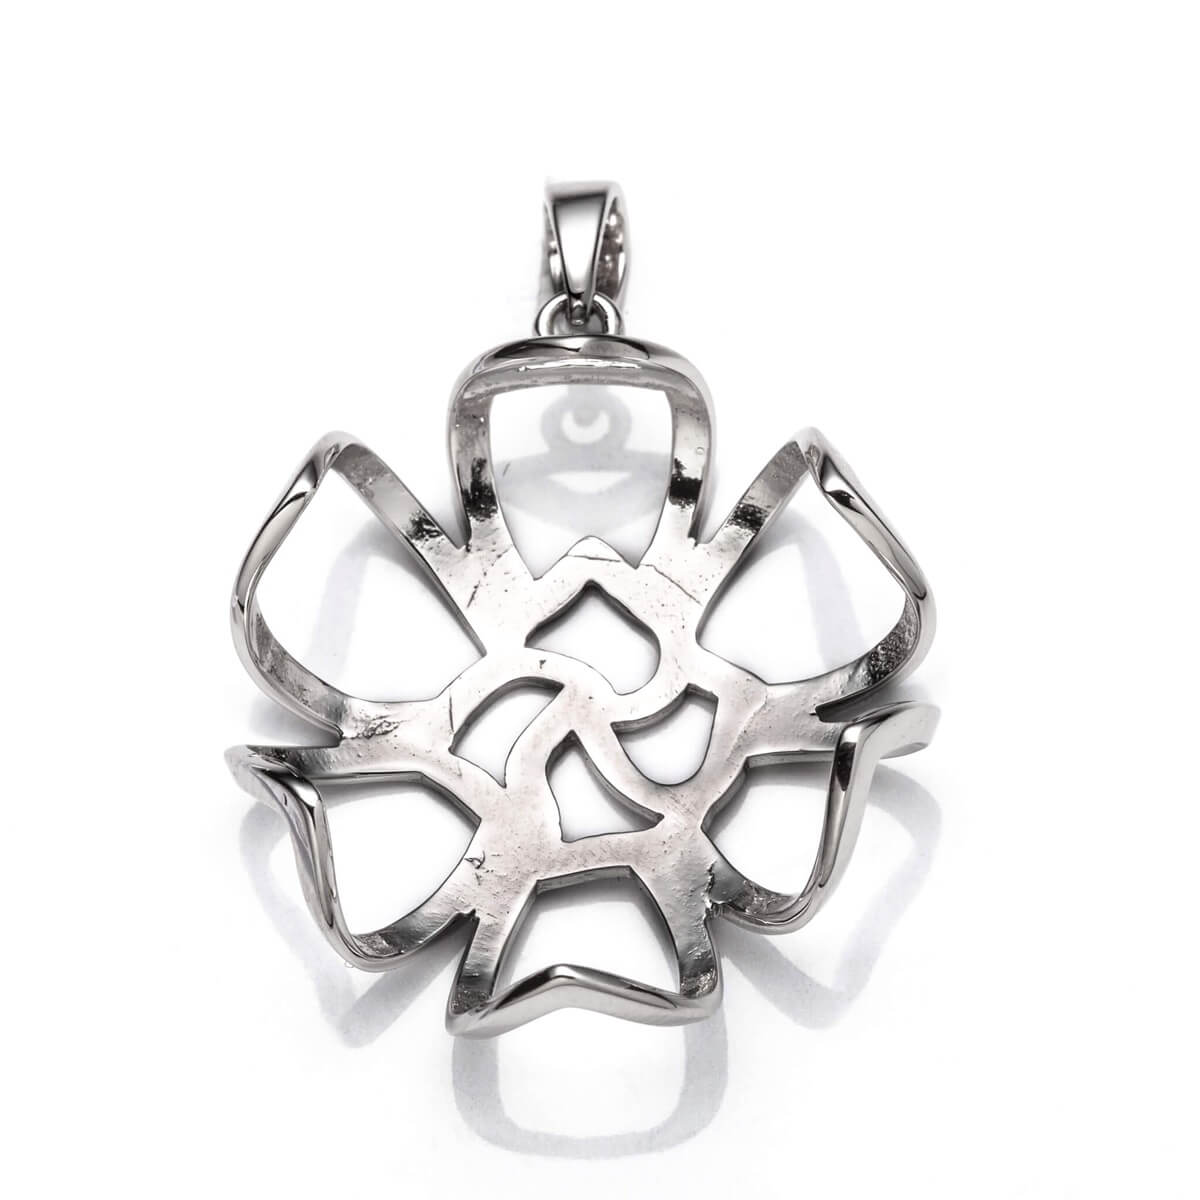 Freeform Floral Pendant with Bail in Sterling Silver 22mm 